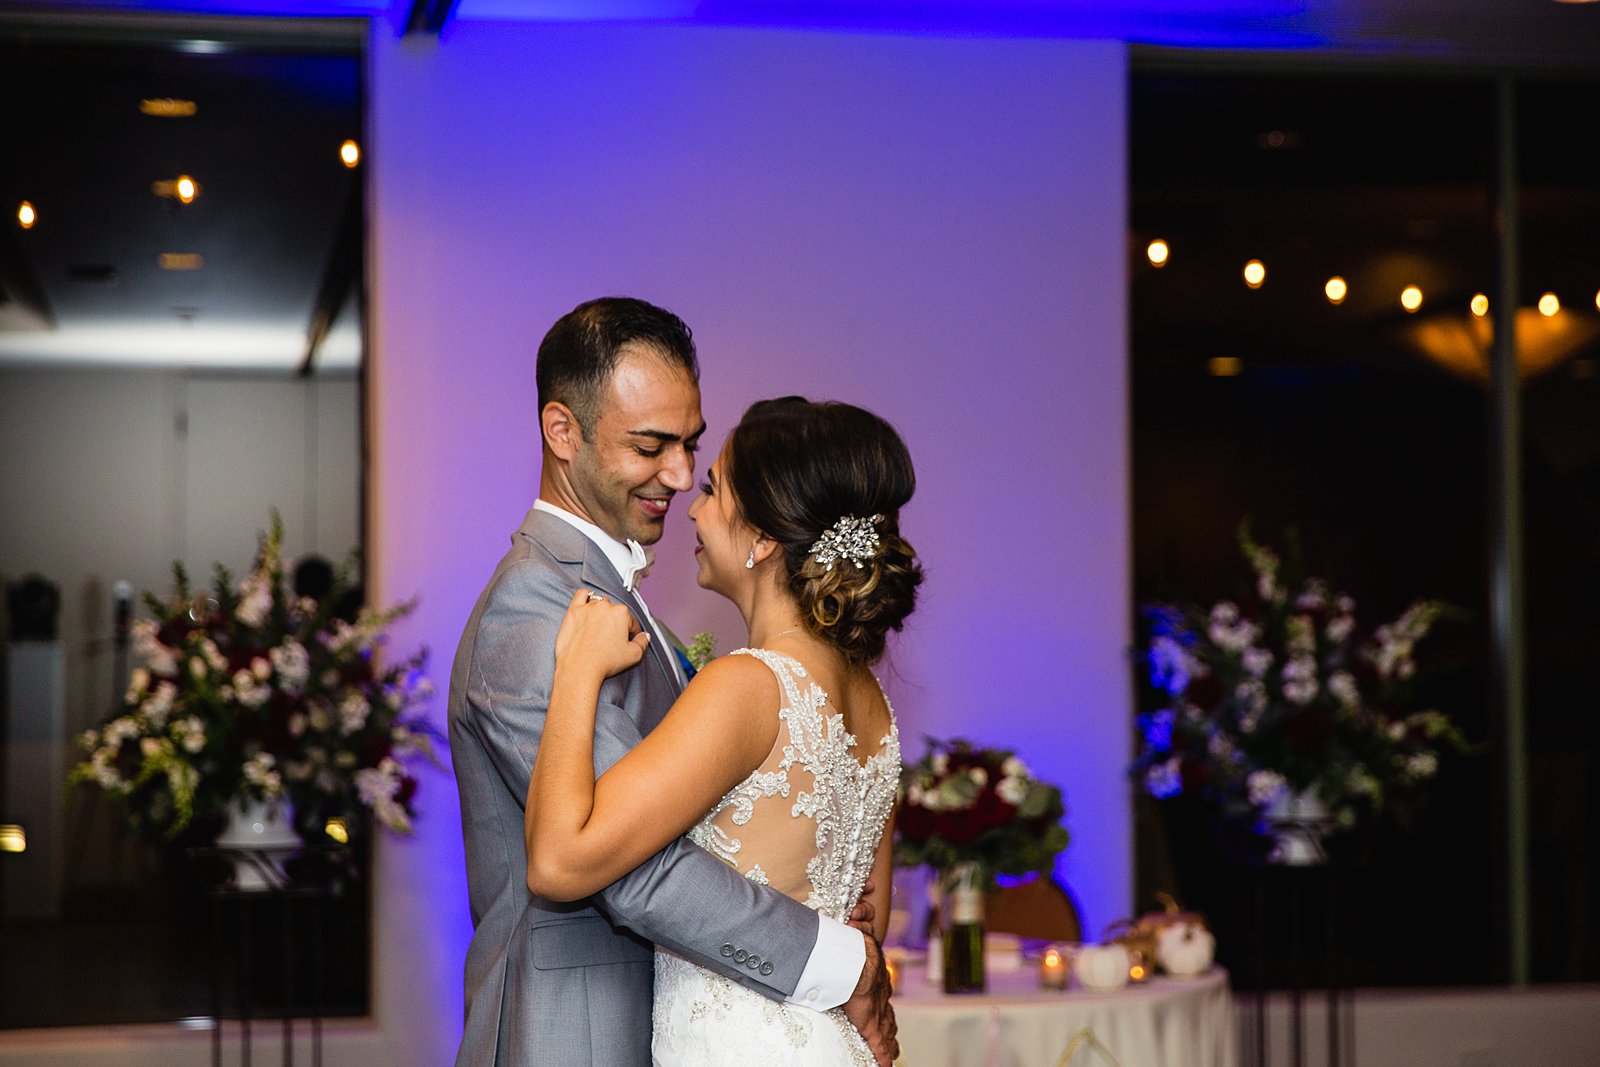 Bride and groom sharing first dance at their Troon North wedding reception by Arizona wedding photographer PMA Photography.